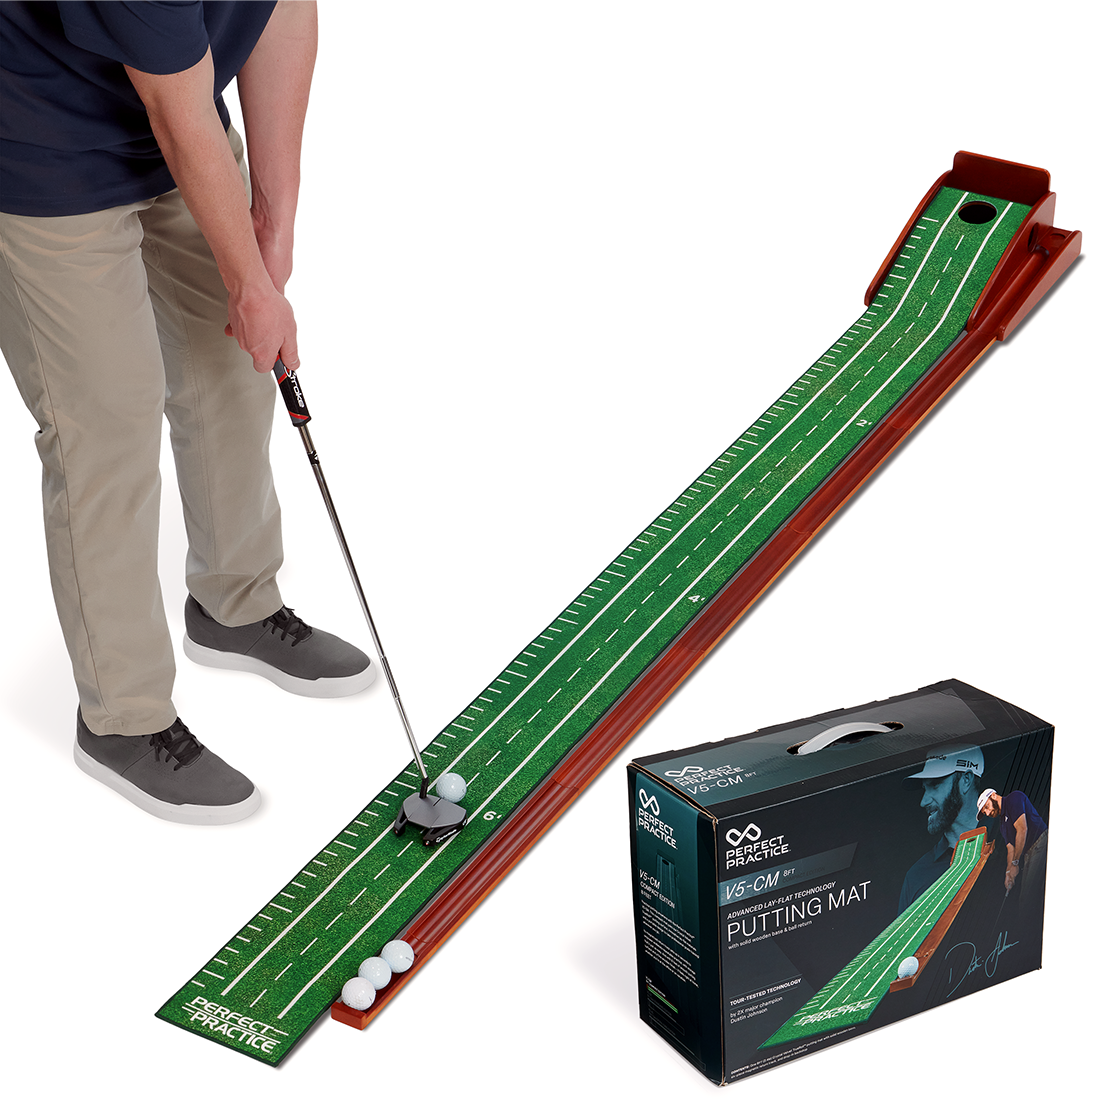 Perfect Practice Putting Mat  Order the Perfect Putting Practice